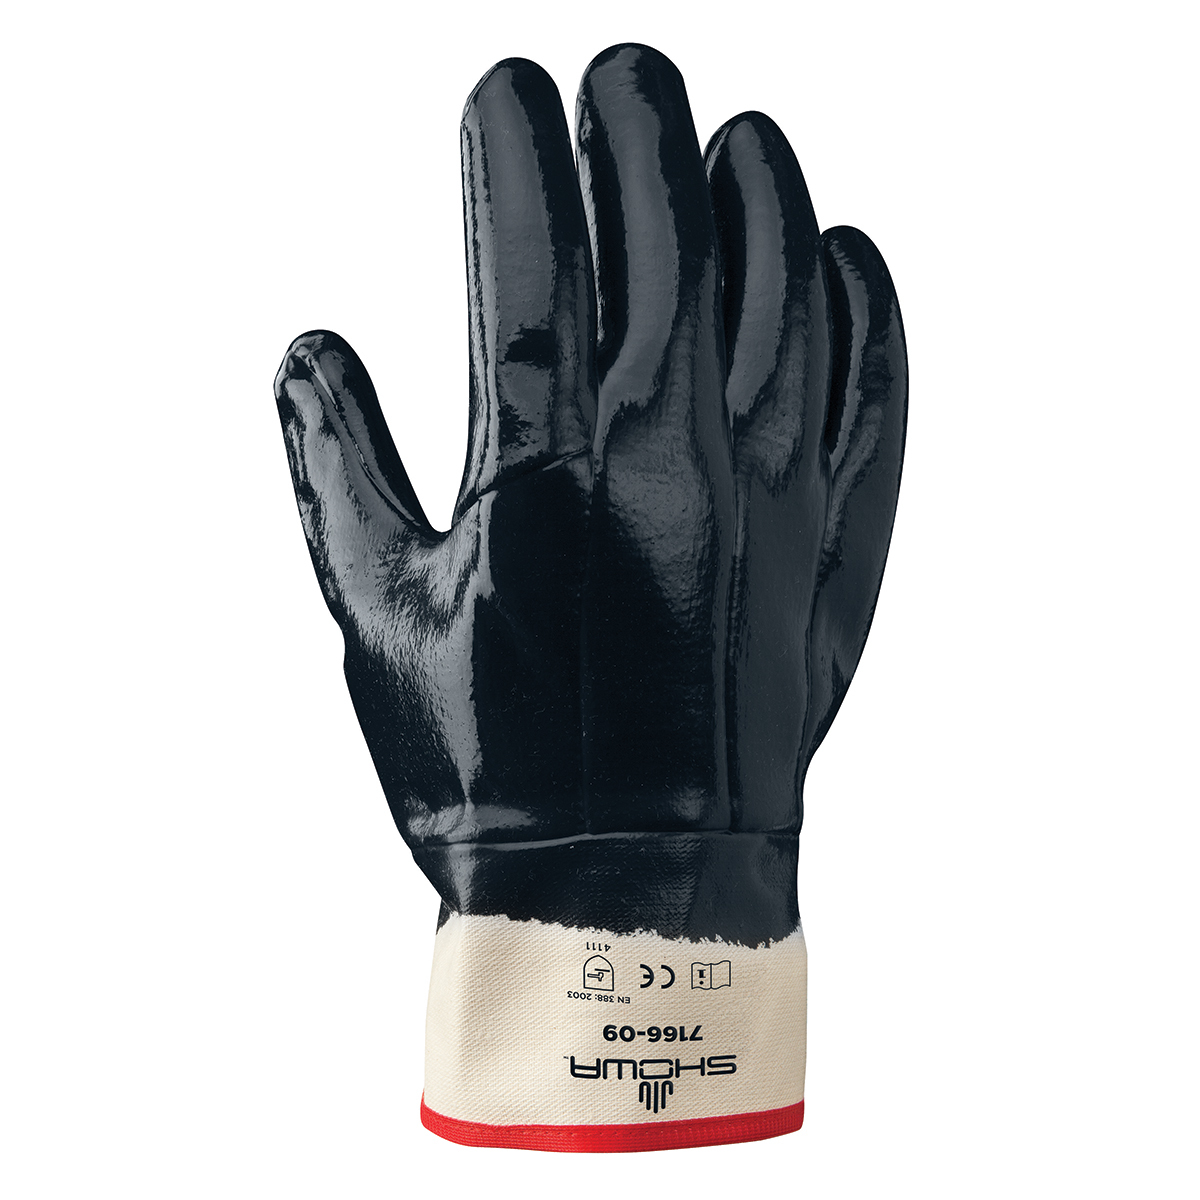 SHOWA® Size 10 Heavy Duty Nitrile Full Hand Coated Work Gloves With Cotton Liner And Safety Cuff